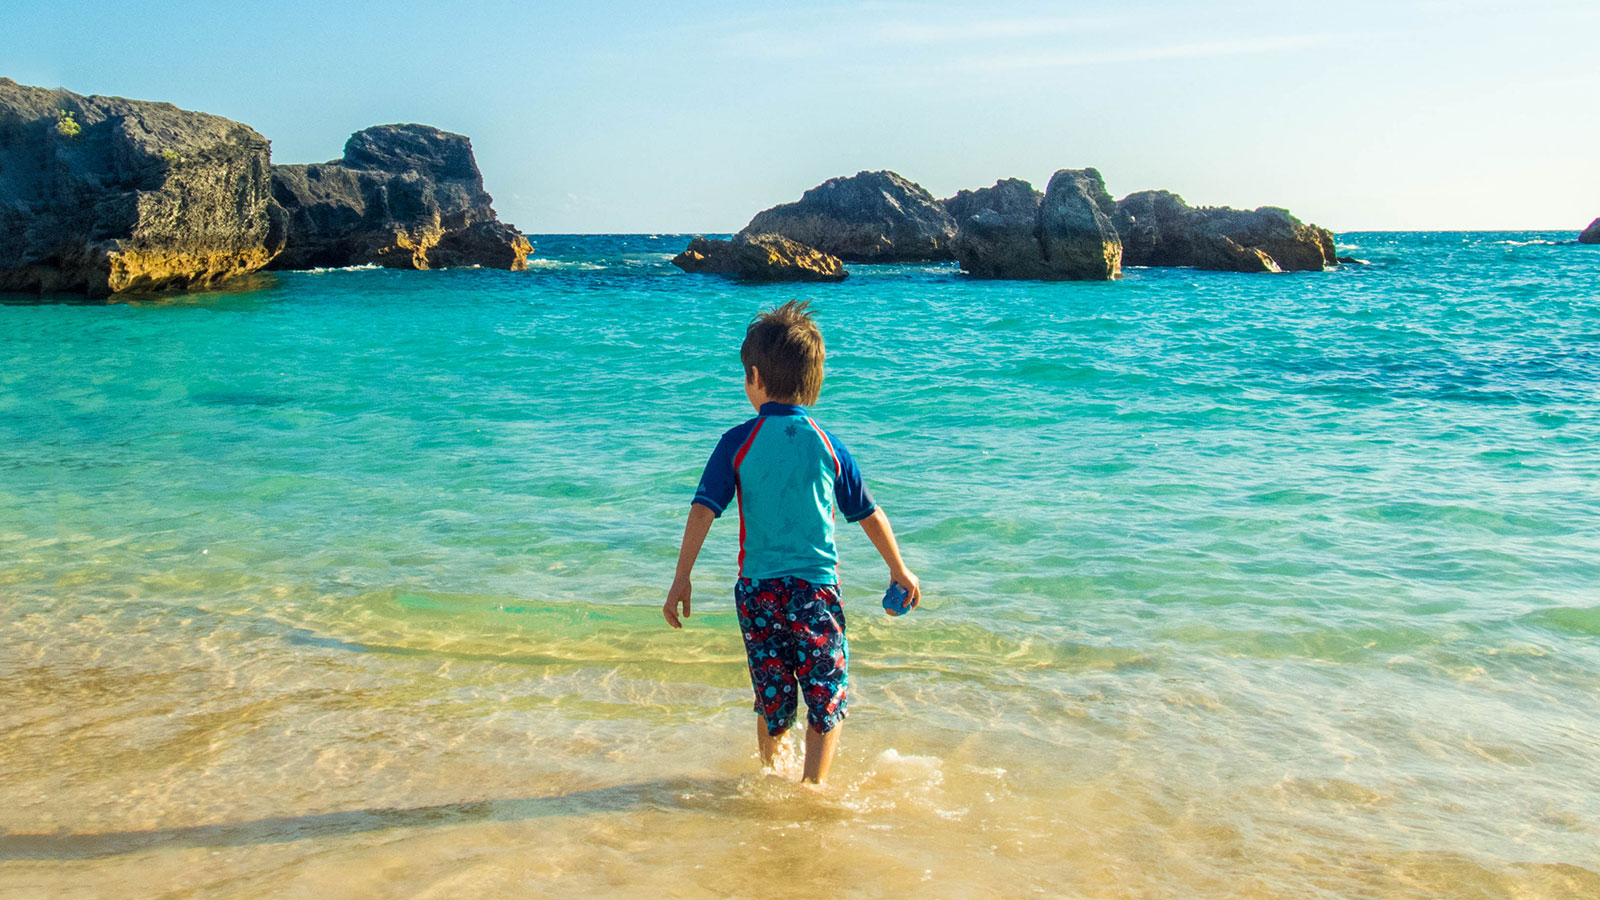 A young boy wades into the waters of Horseshoe Bay Beach, the perfect place to visit in Bermuda with kids